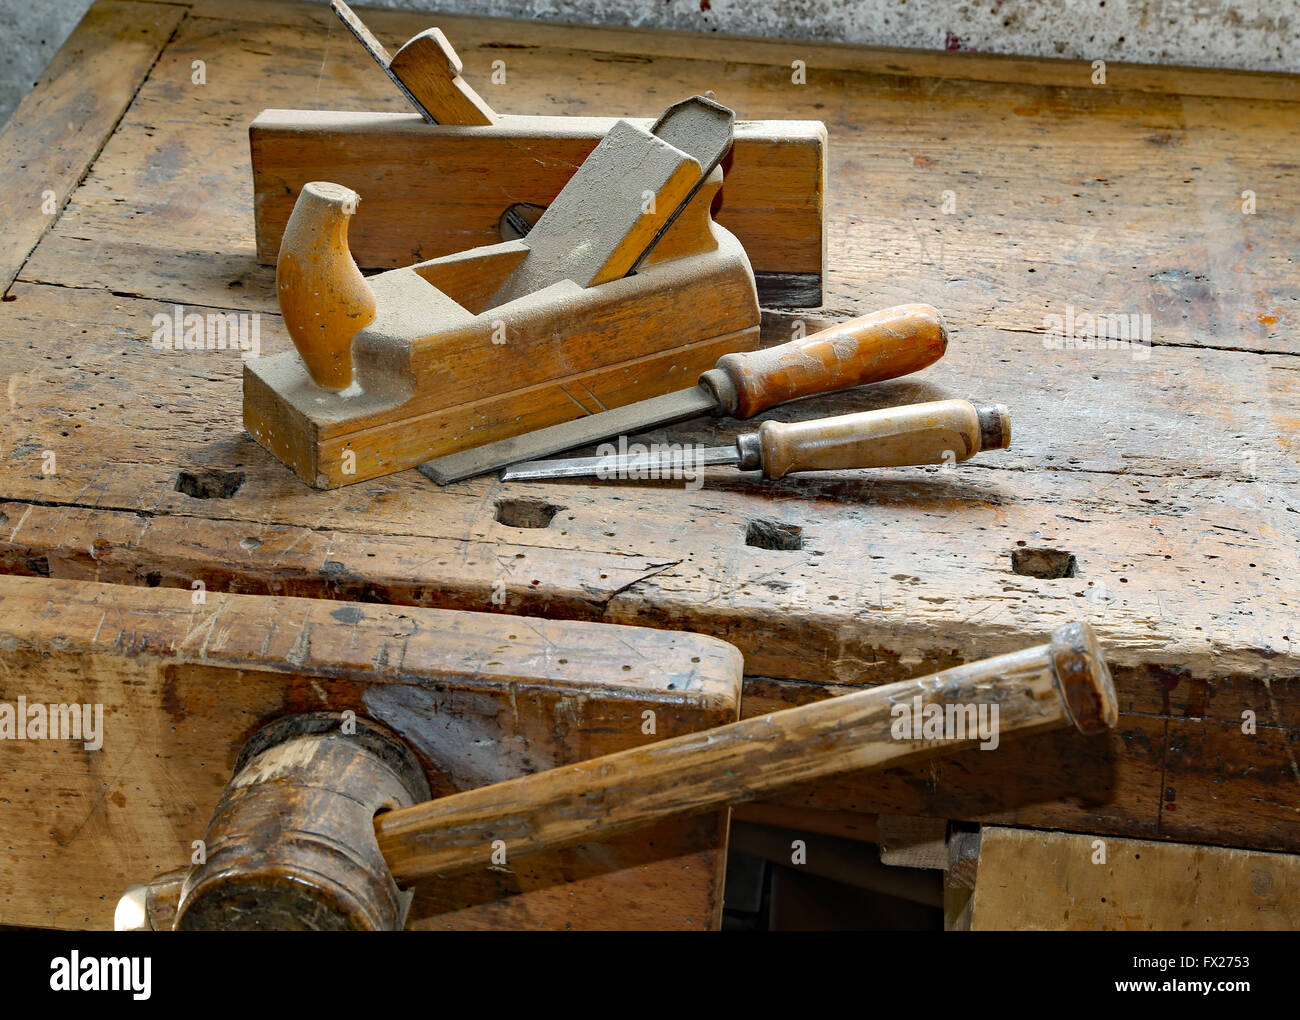 planes and chisels in the Workbench with a wooden grip inside the craftsman joinery manufacturer Stock Photo